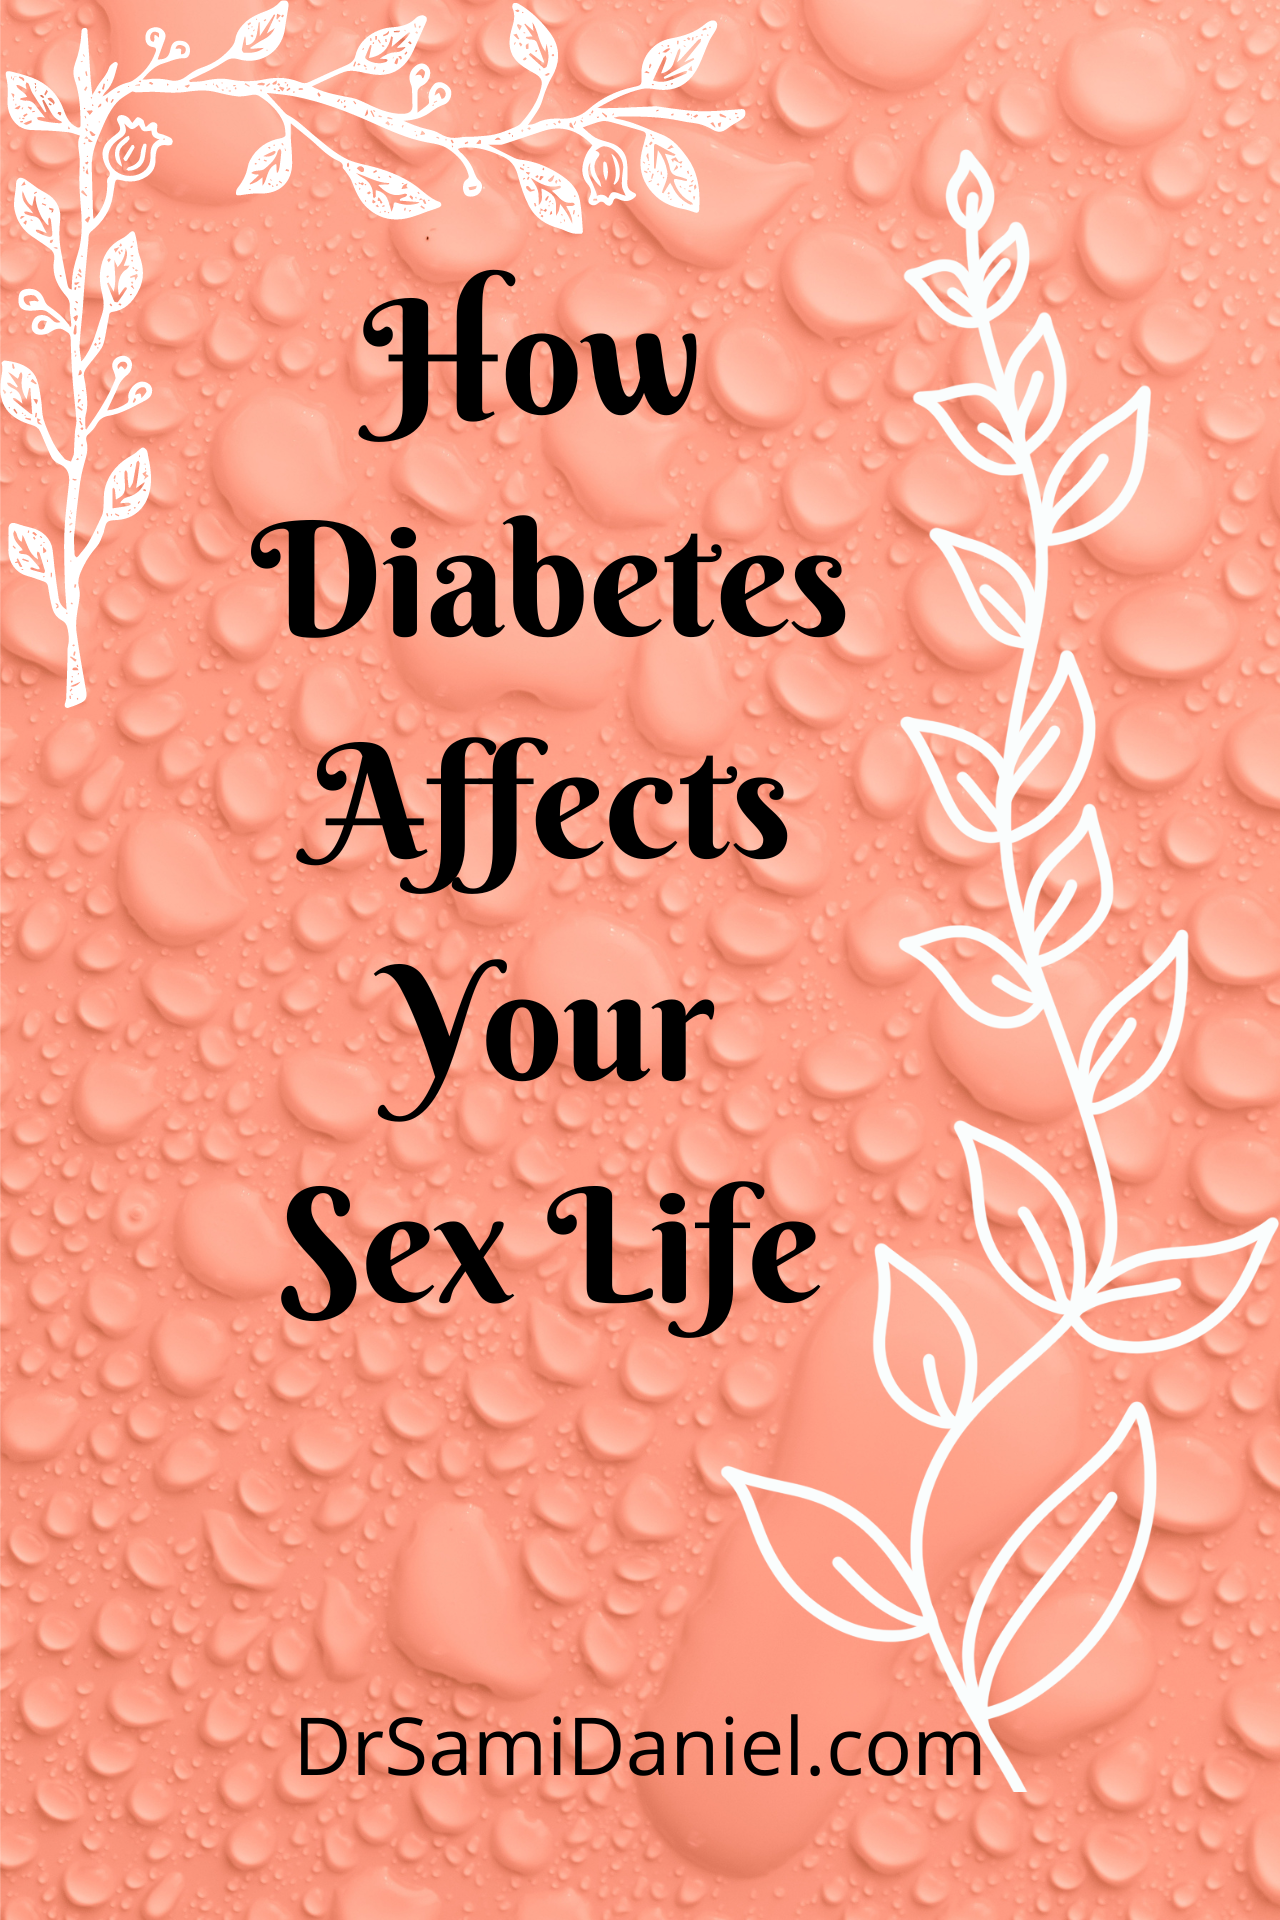 Learn how diabetes can affect your sex life and what you can do about it. Learn your treatment options, and how you can control diabetes